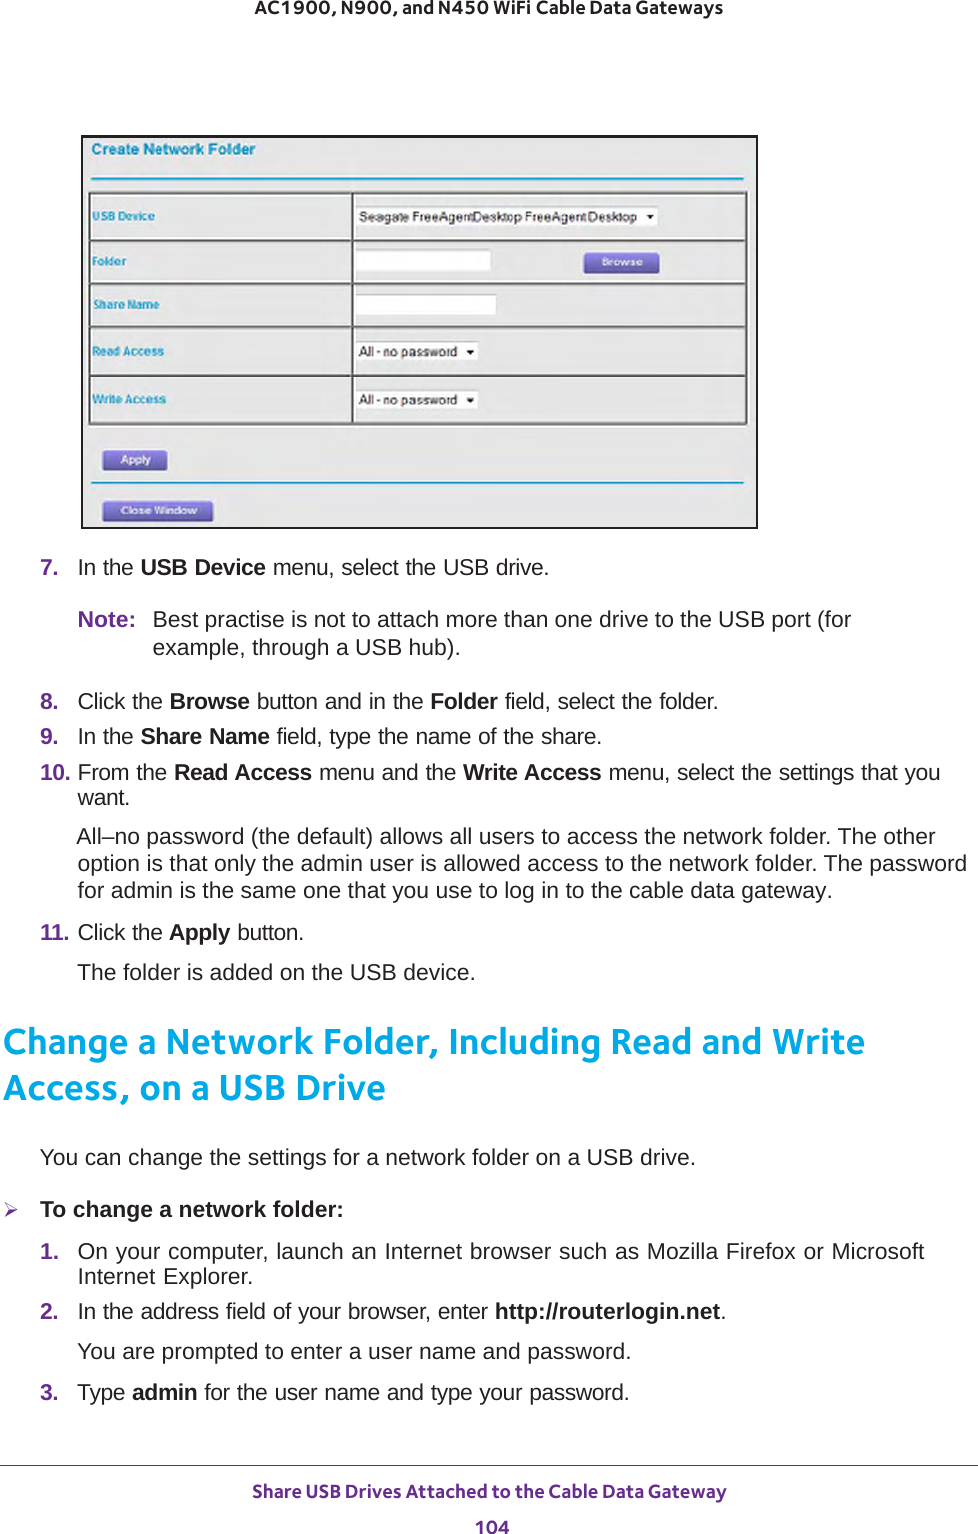 Share USB Drives Attached to the Cable Data Gateway 104AC1900, N900, and N450 WiFi Cable Data Gateways 7.  In the USB Device menu, select the USB drive. Note: Best practise is not to attach more than one drive to the USB port (for example, through a USB hub).8.  Click the Browse button and in the Folder field, select the folder. 9.  In the Share Name field, type the name of the share. 10. From the Read Access menu and the Write Access menu, select the settings that you want.All–no password (the default) allows all users to access the network folder. The other option is that only the admin user is allowed access to the network folder. The password for admin is the same one that you use to log in to the cable data gateway. 11. Click the Apply button.The folder is added on the USB device.Change a Network Folder, Including Read and Write Access, on a USB DriveYou can change the settings for a network folder on a USB drive.To change a network folder:1.  On your computer, launch an Internet browser such as Mozilla Firefox or Microsoft Internet Explorer. 2.  In the address field of your browser, enter http://routerlogin.net.You are prompted to enter a user name and password.3.  Type admin for the user name and type your password.